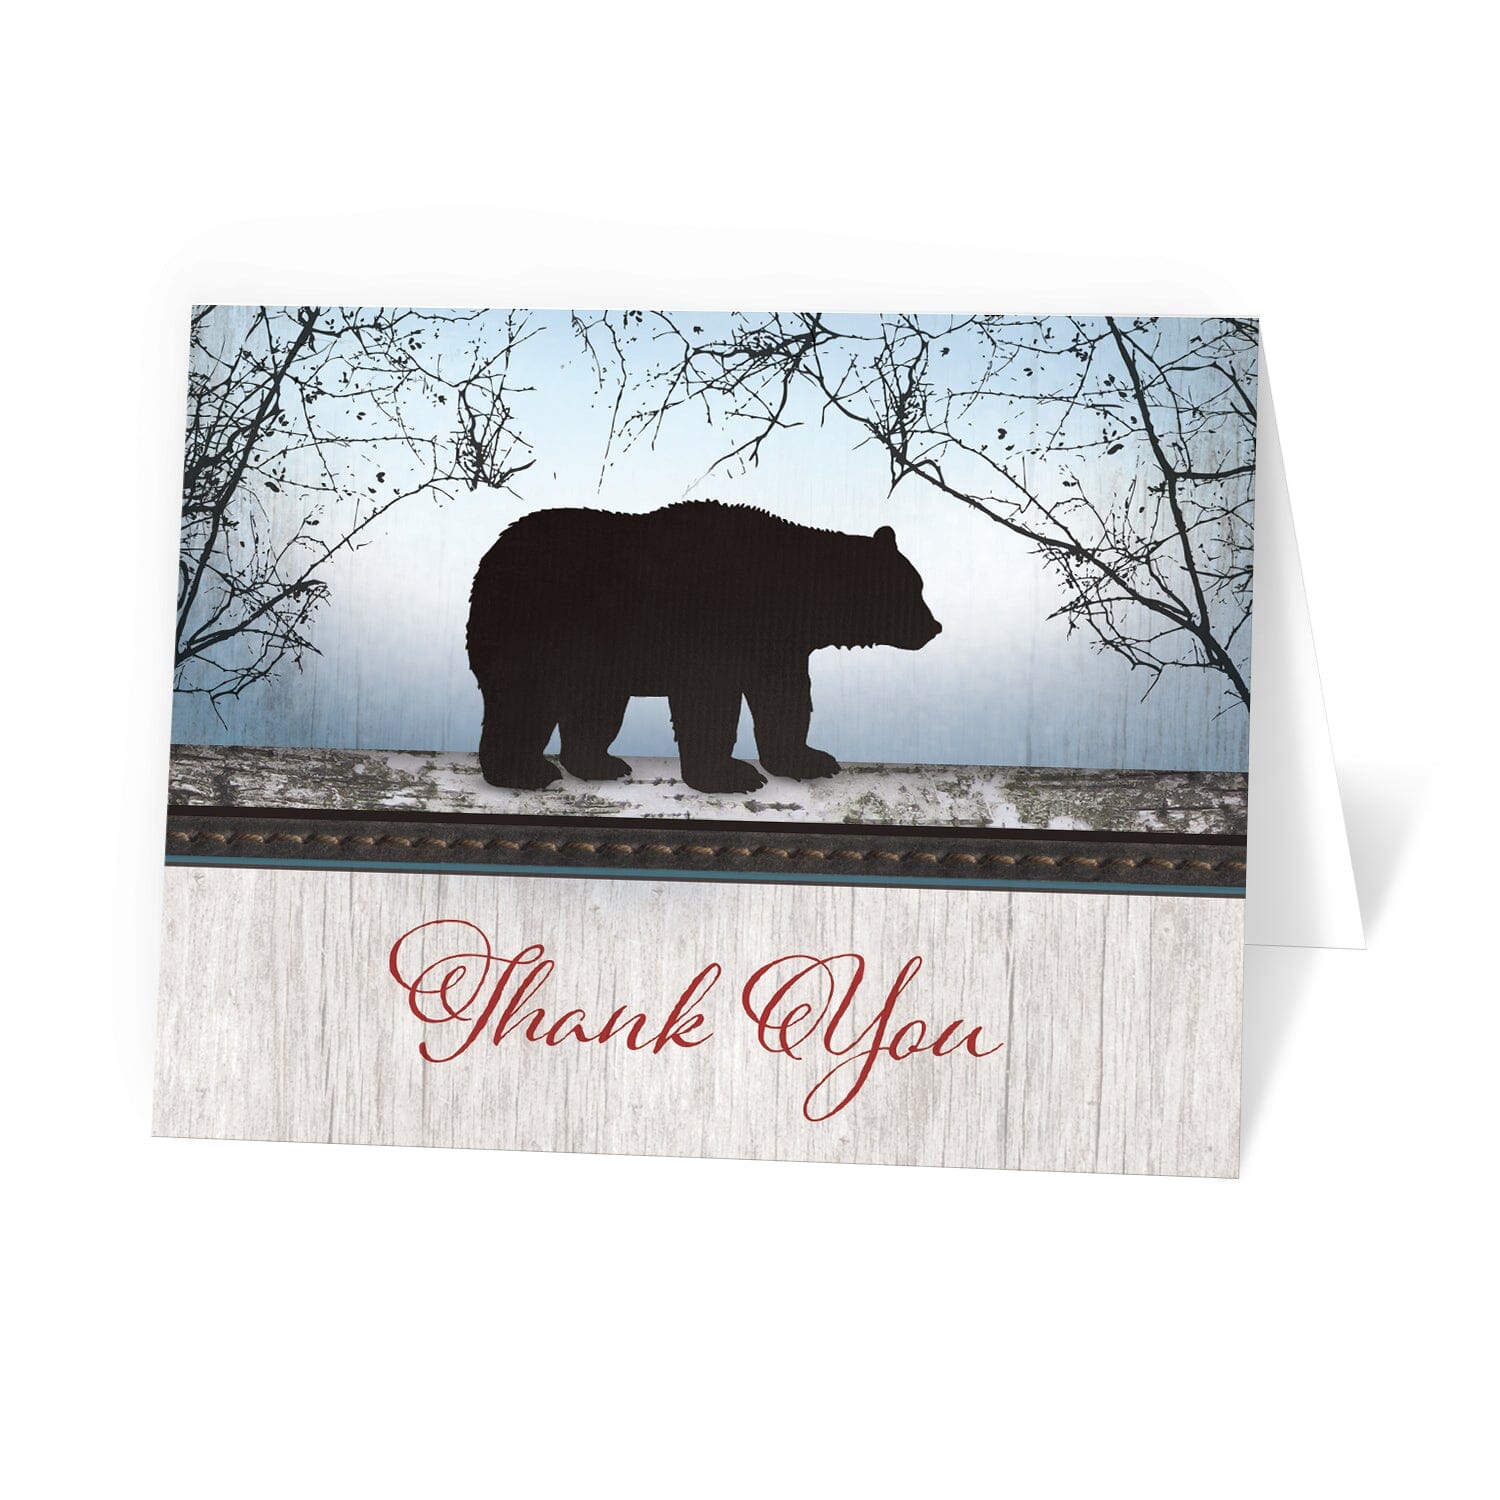 Rustic Bear Wood Red Blue Thank You Cards at Artistically Invited.